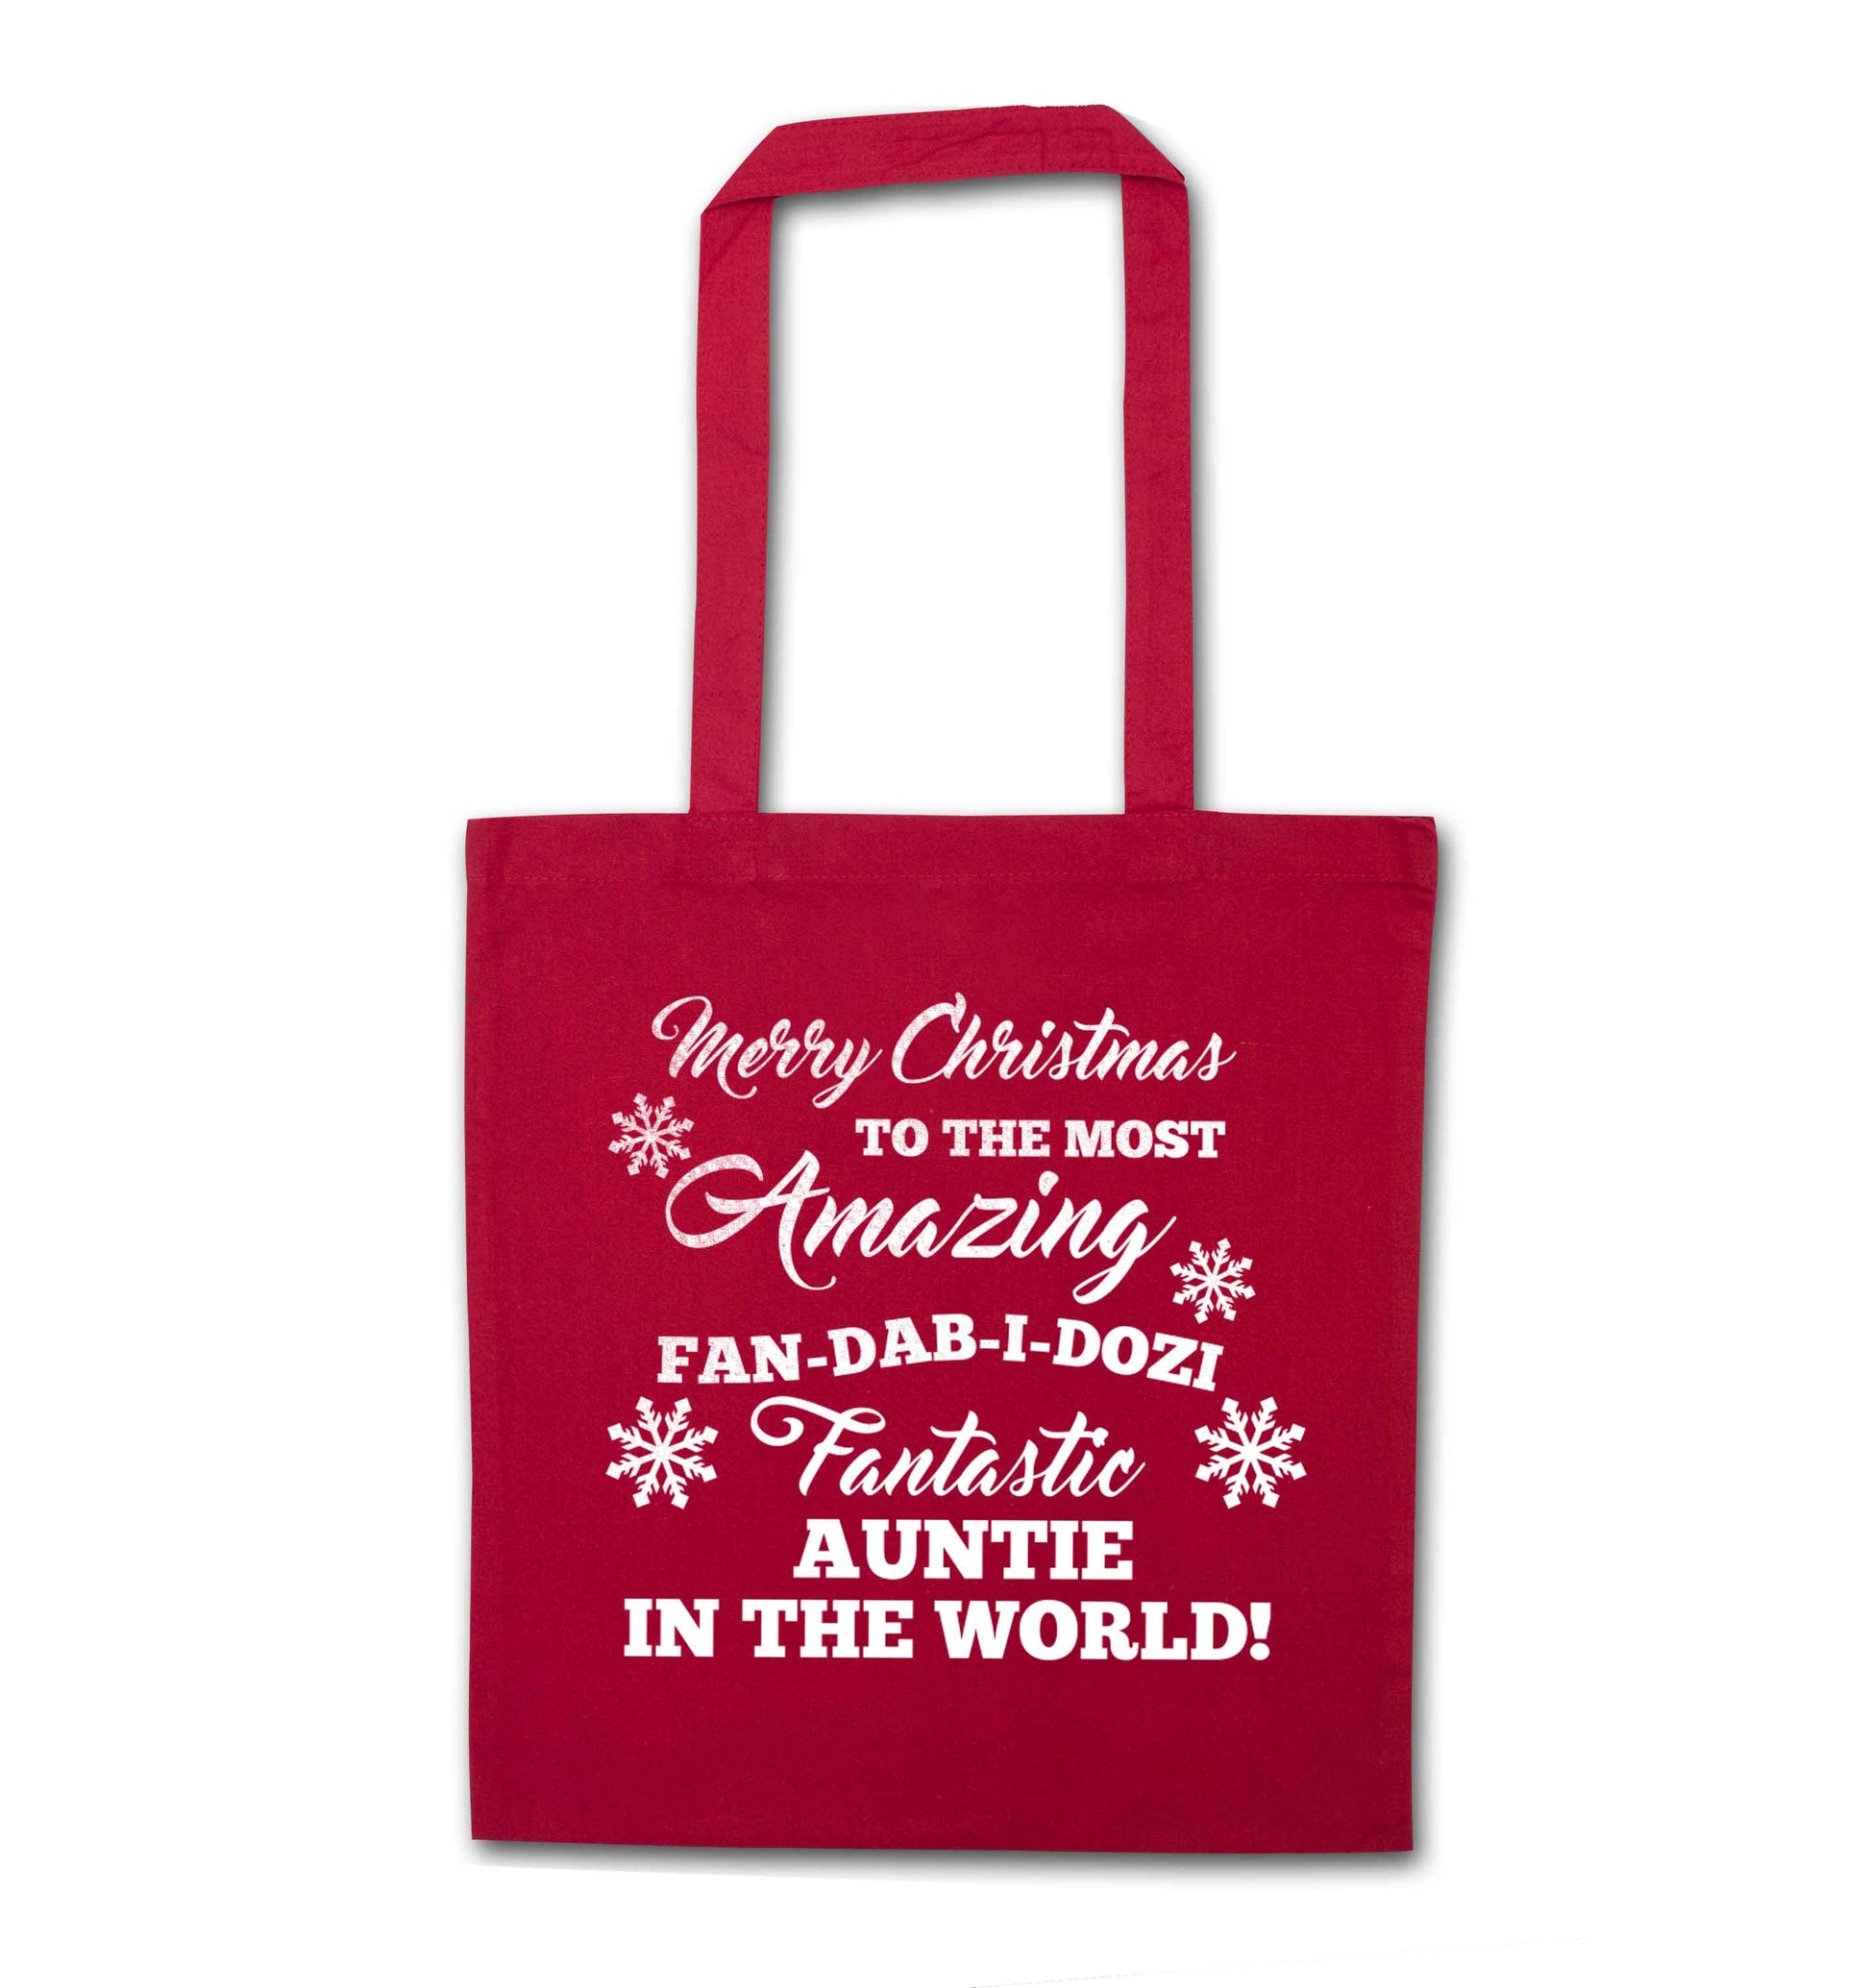 Merry Christmas to the most amazing fan-dab-i-dozi fantasic Auntie in the world red tote bag